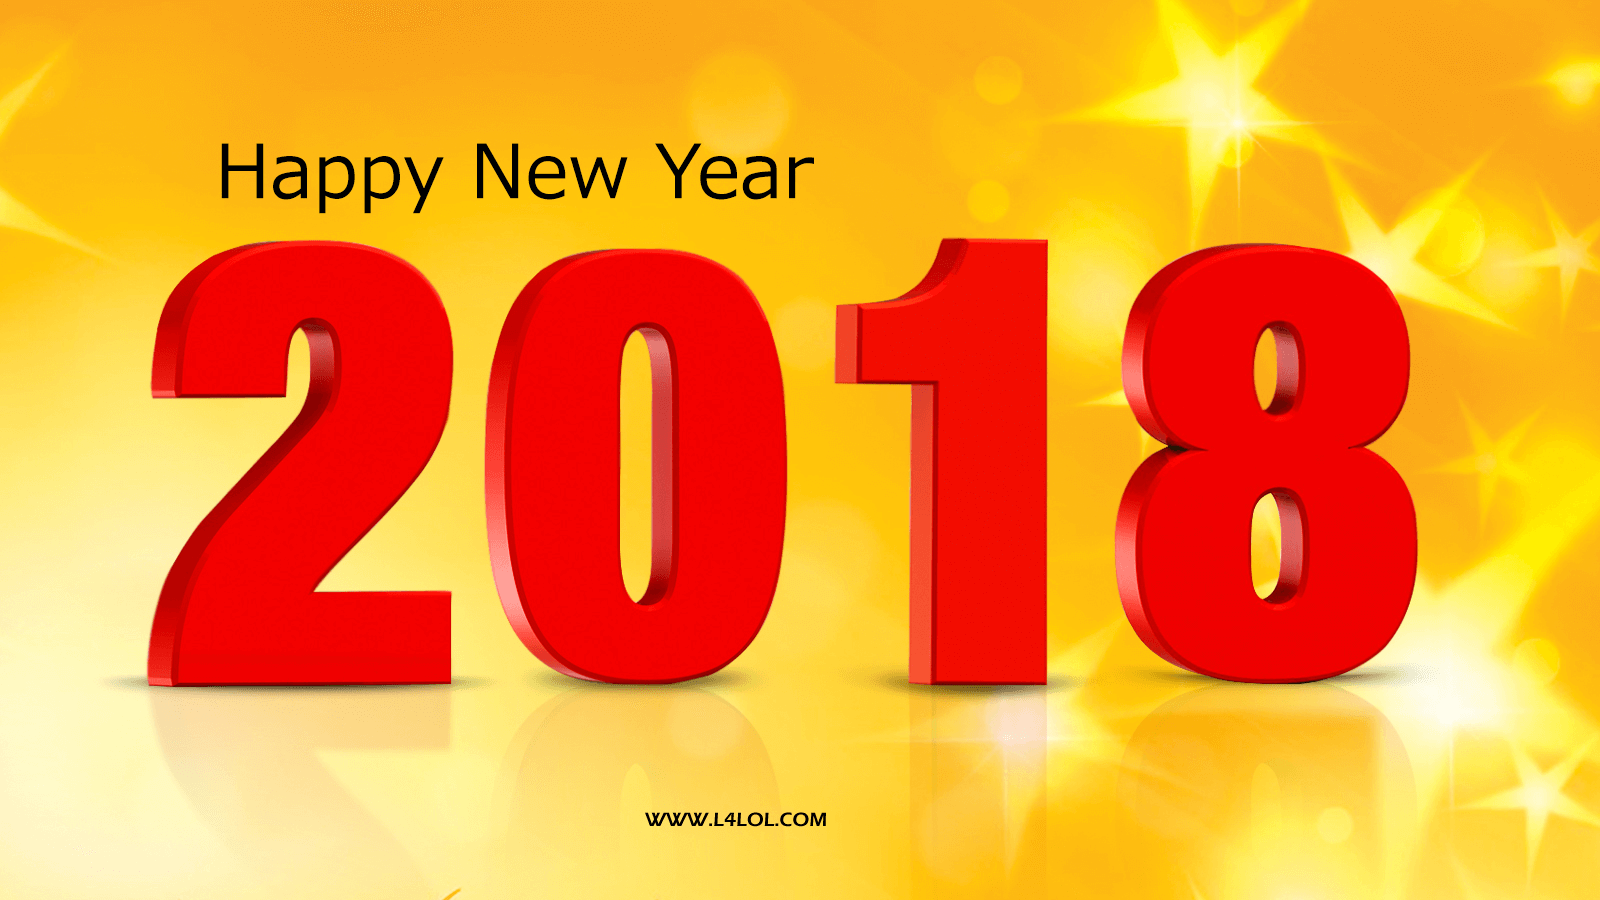 Happy New Year 2018 Image New Year 2018 HD Wallpaper New